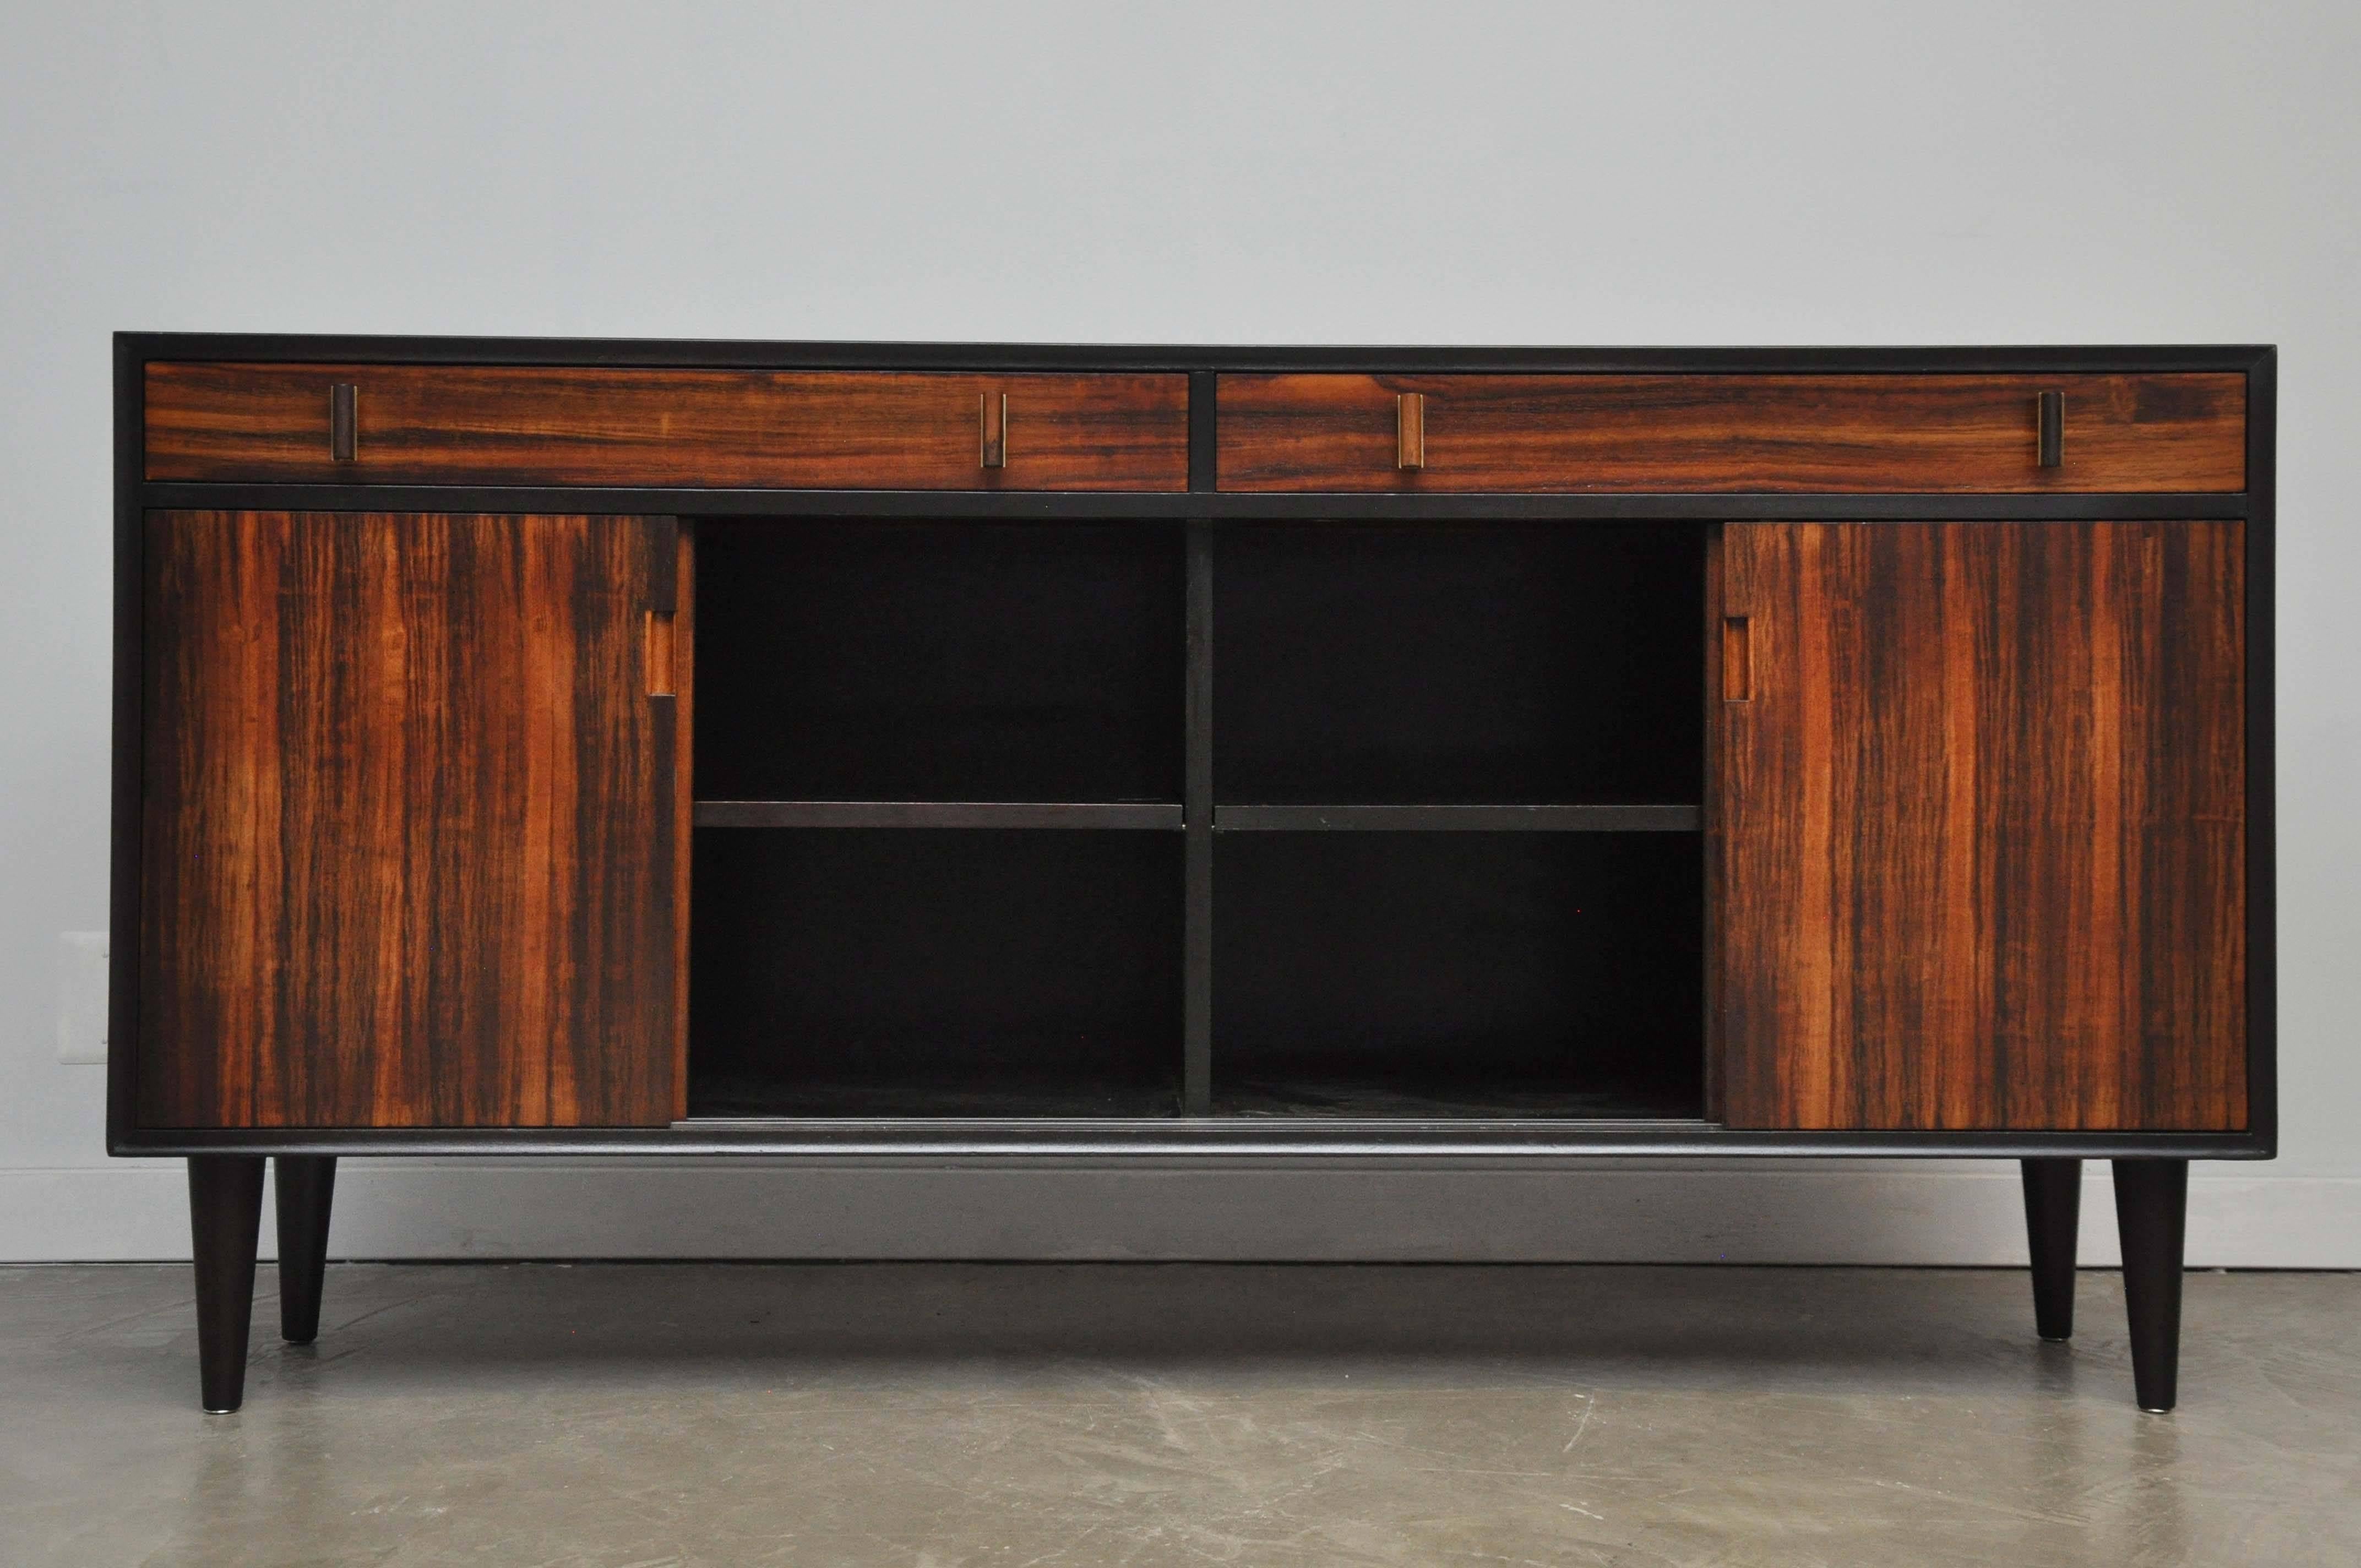 Sideboard designed by Edward Wormley for Dunbar. Model 277. Dark espresso finish case with rosewood doors and drawers. Brass and rosewood drawer pulls. Piece has been beautifully restored.